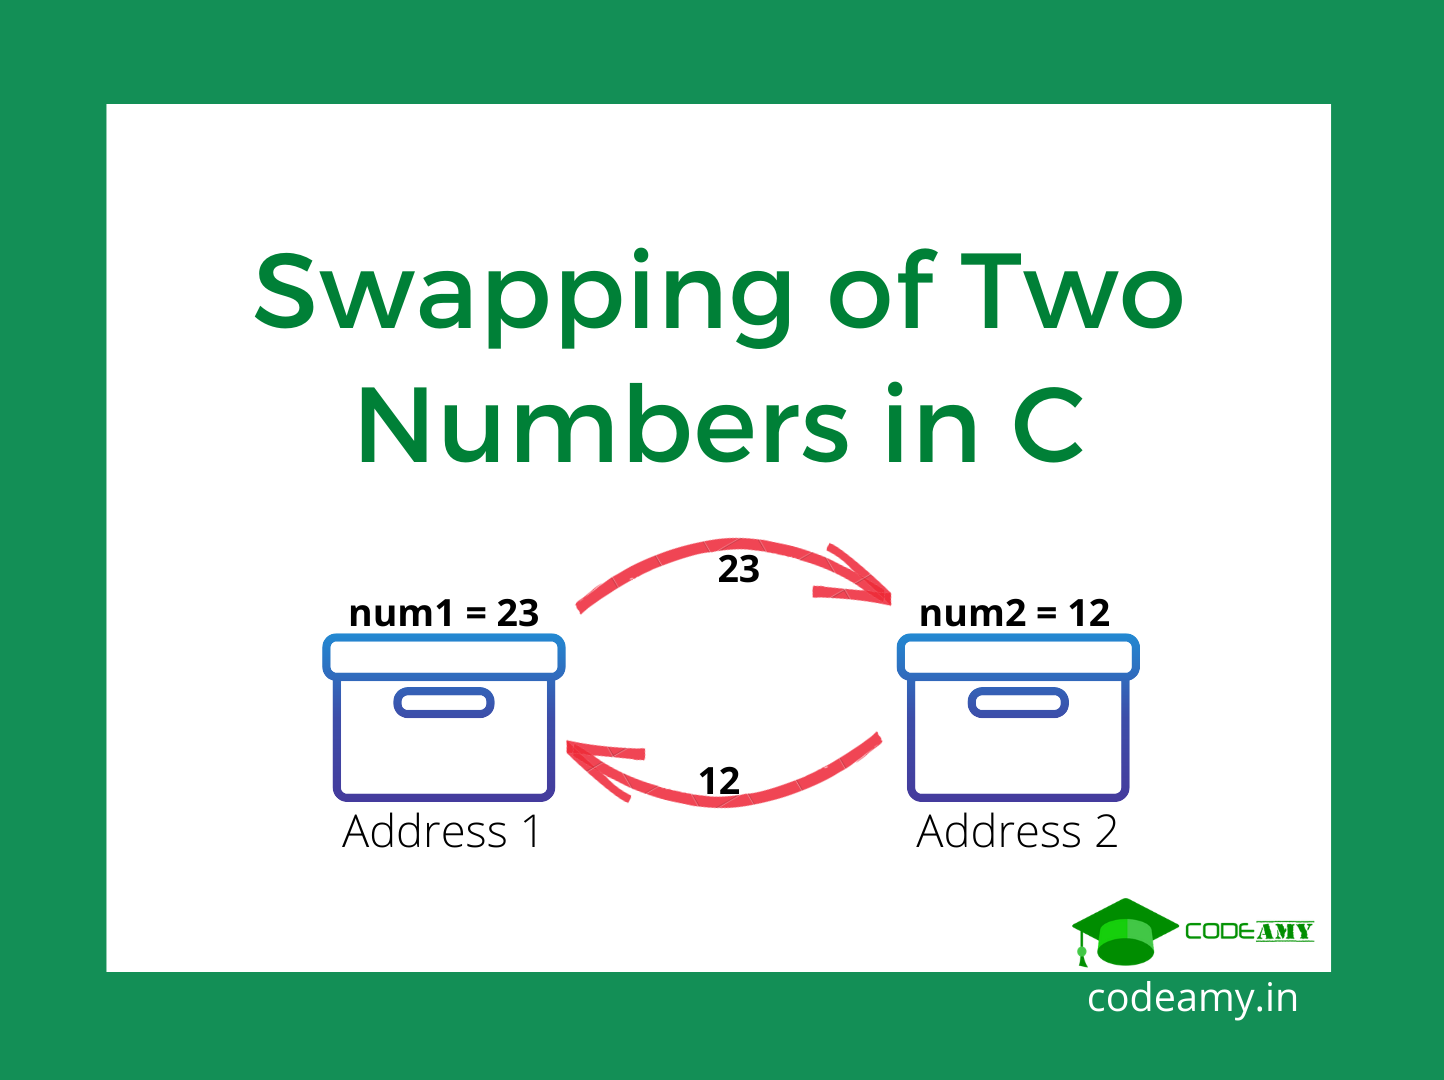 Swapping of Two Numbers in C